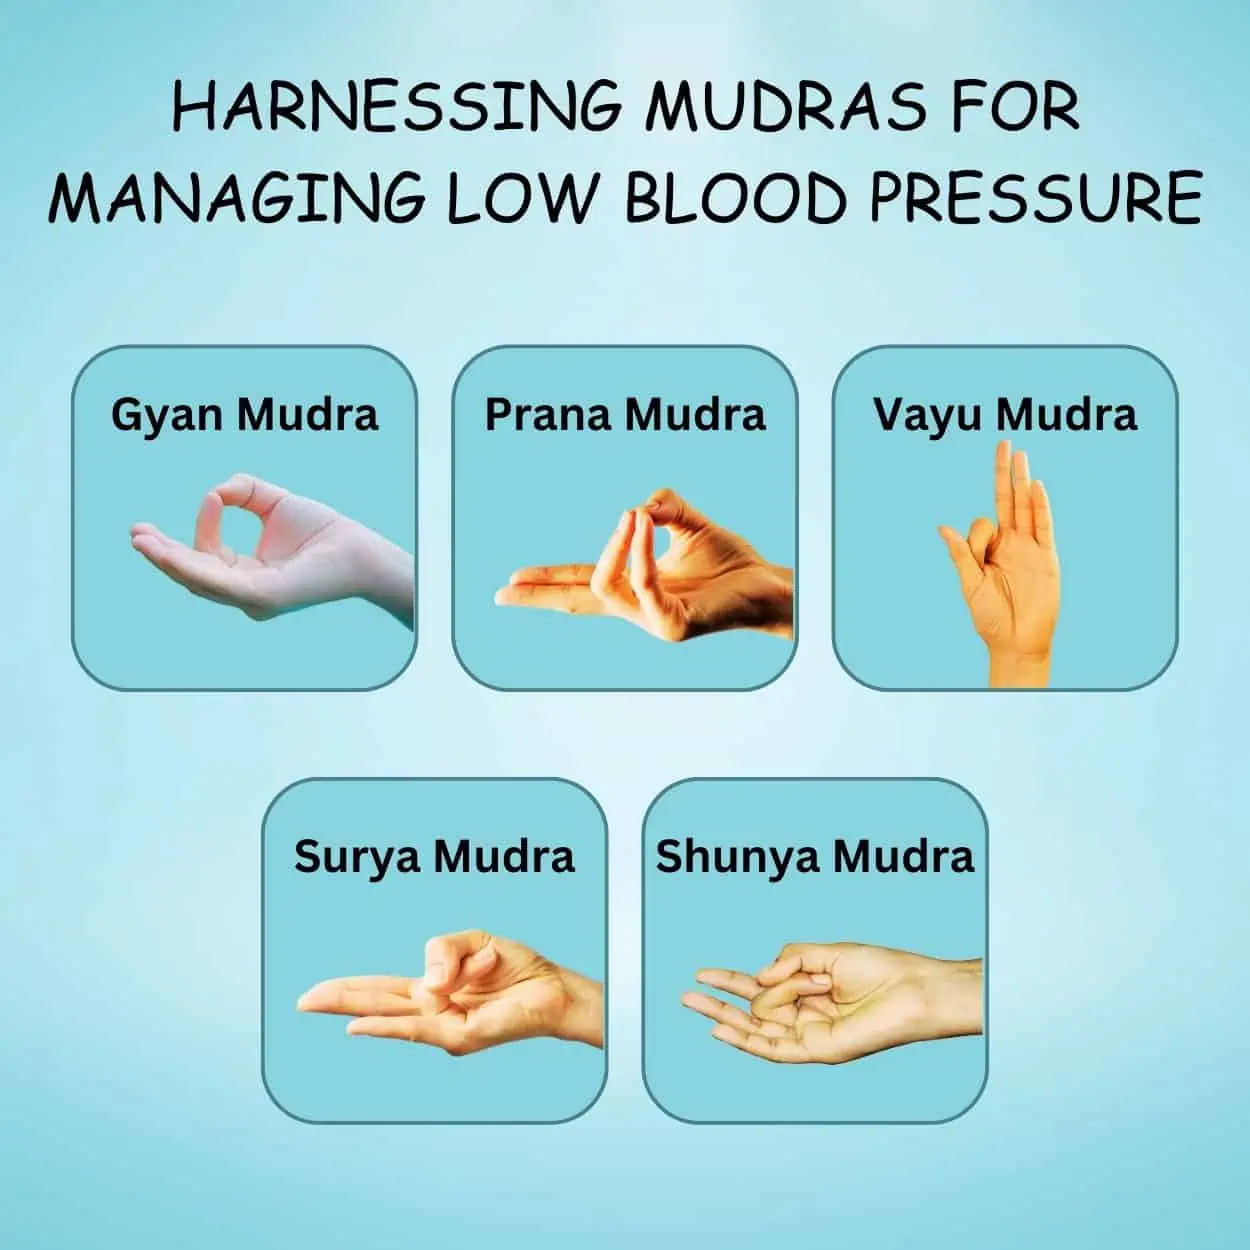 Harnessing Mudras for Managing Low Blood Pressure